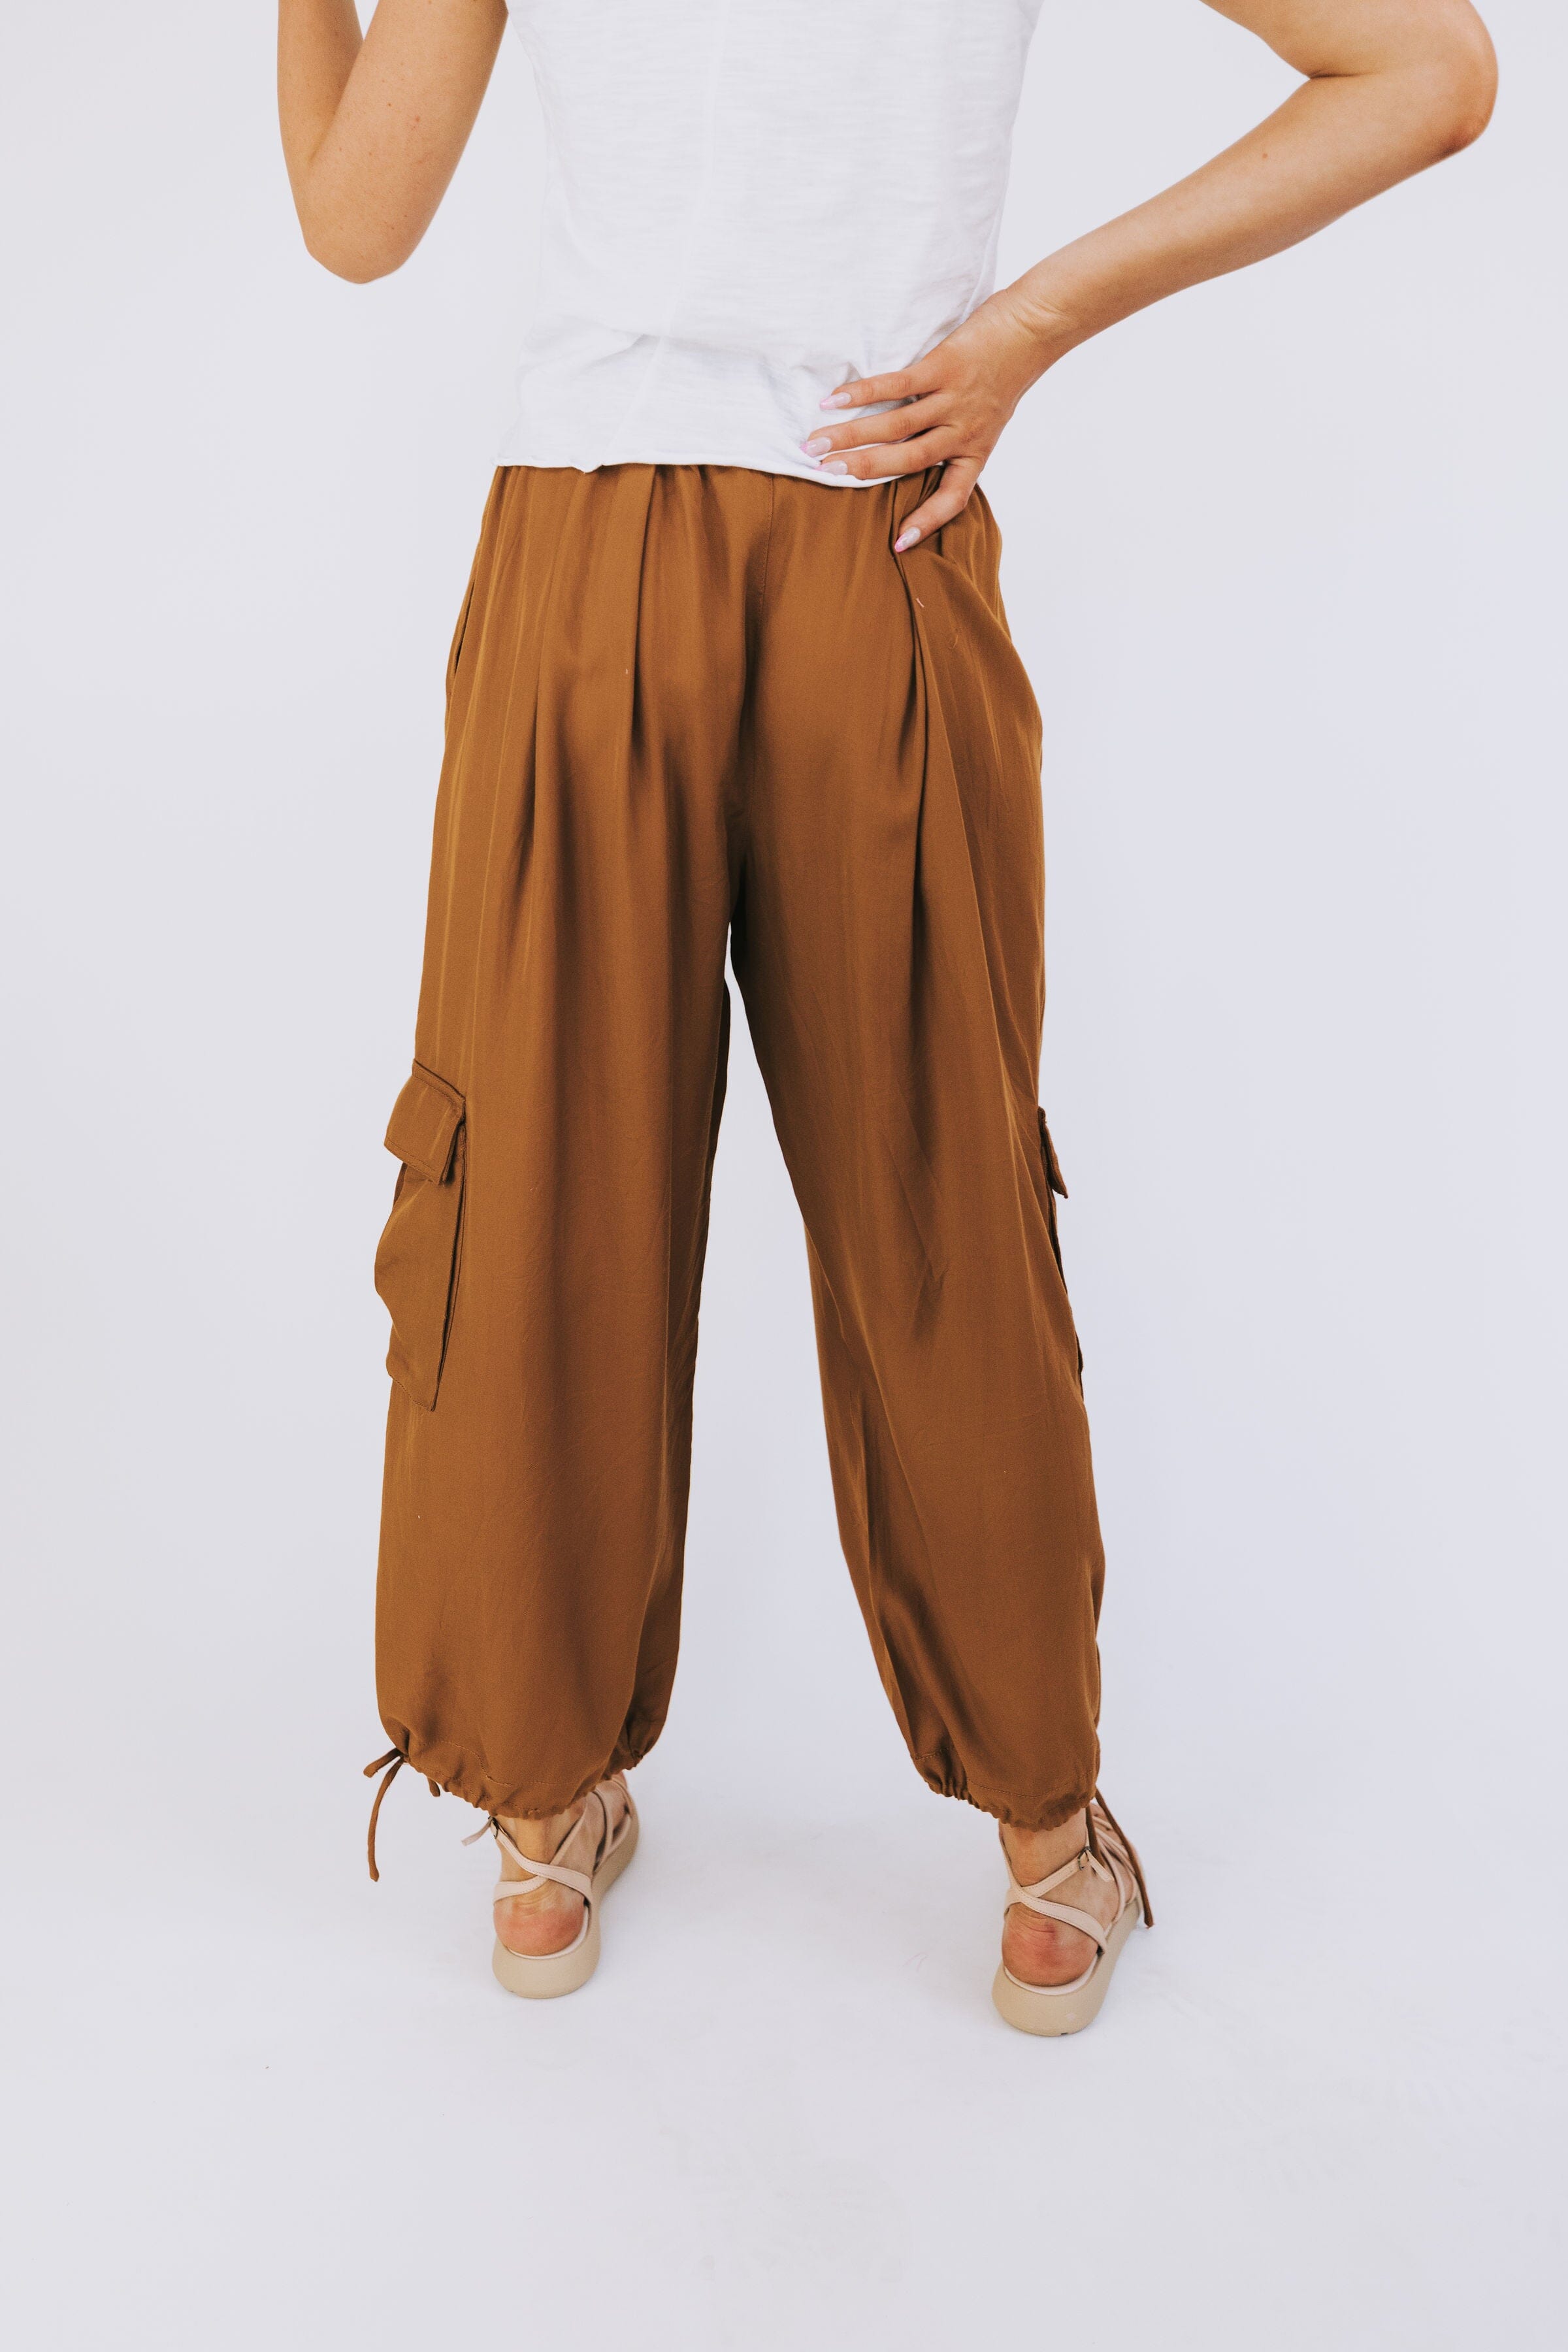 FREE PEOPLE - Palash Cargo Solid